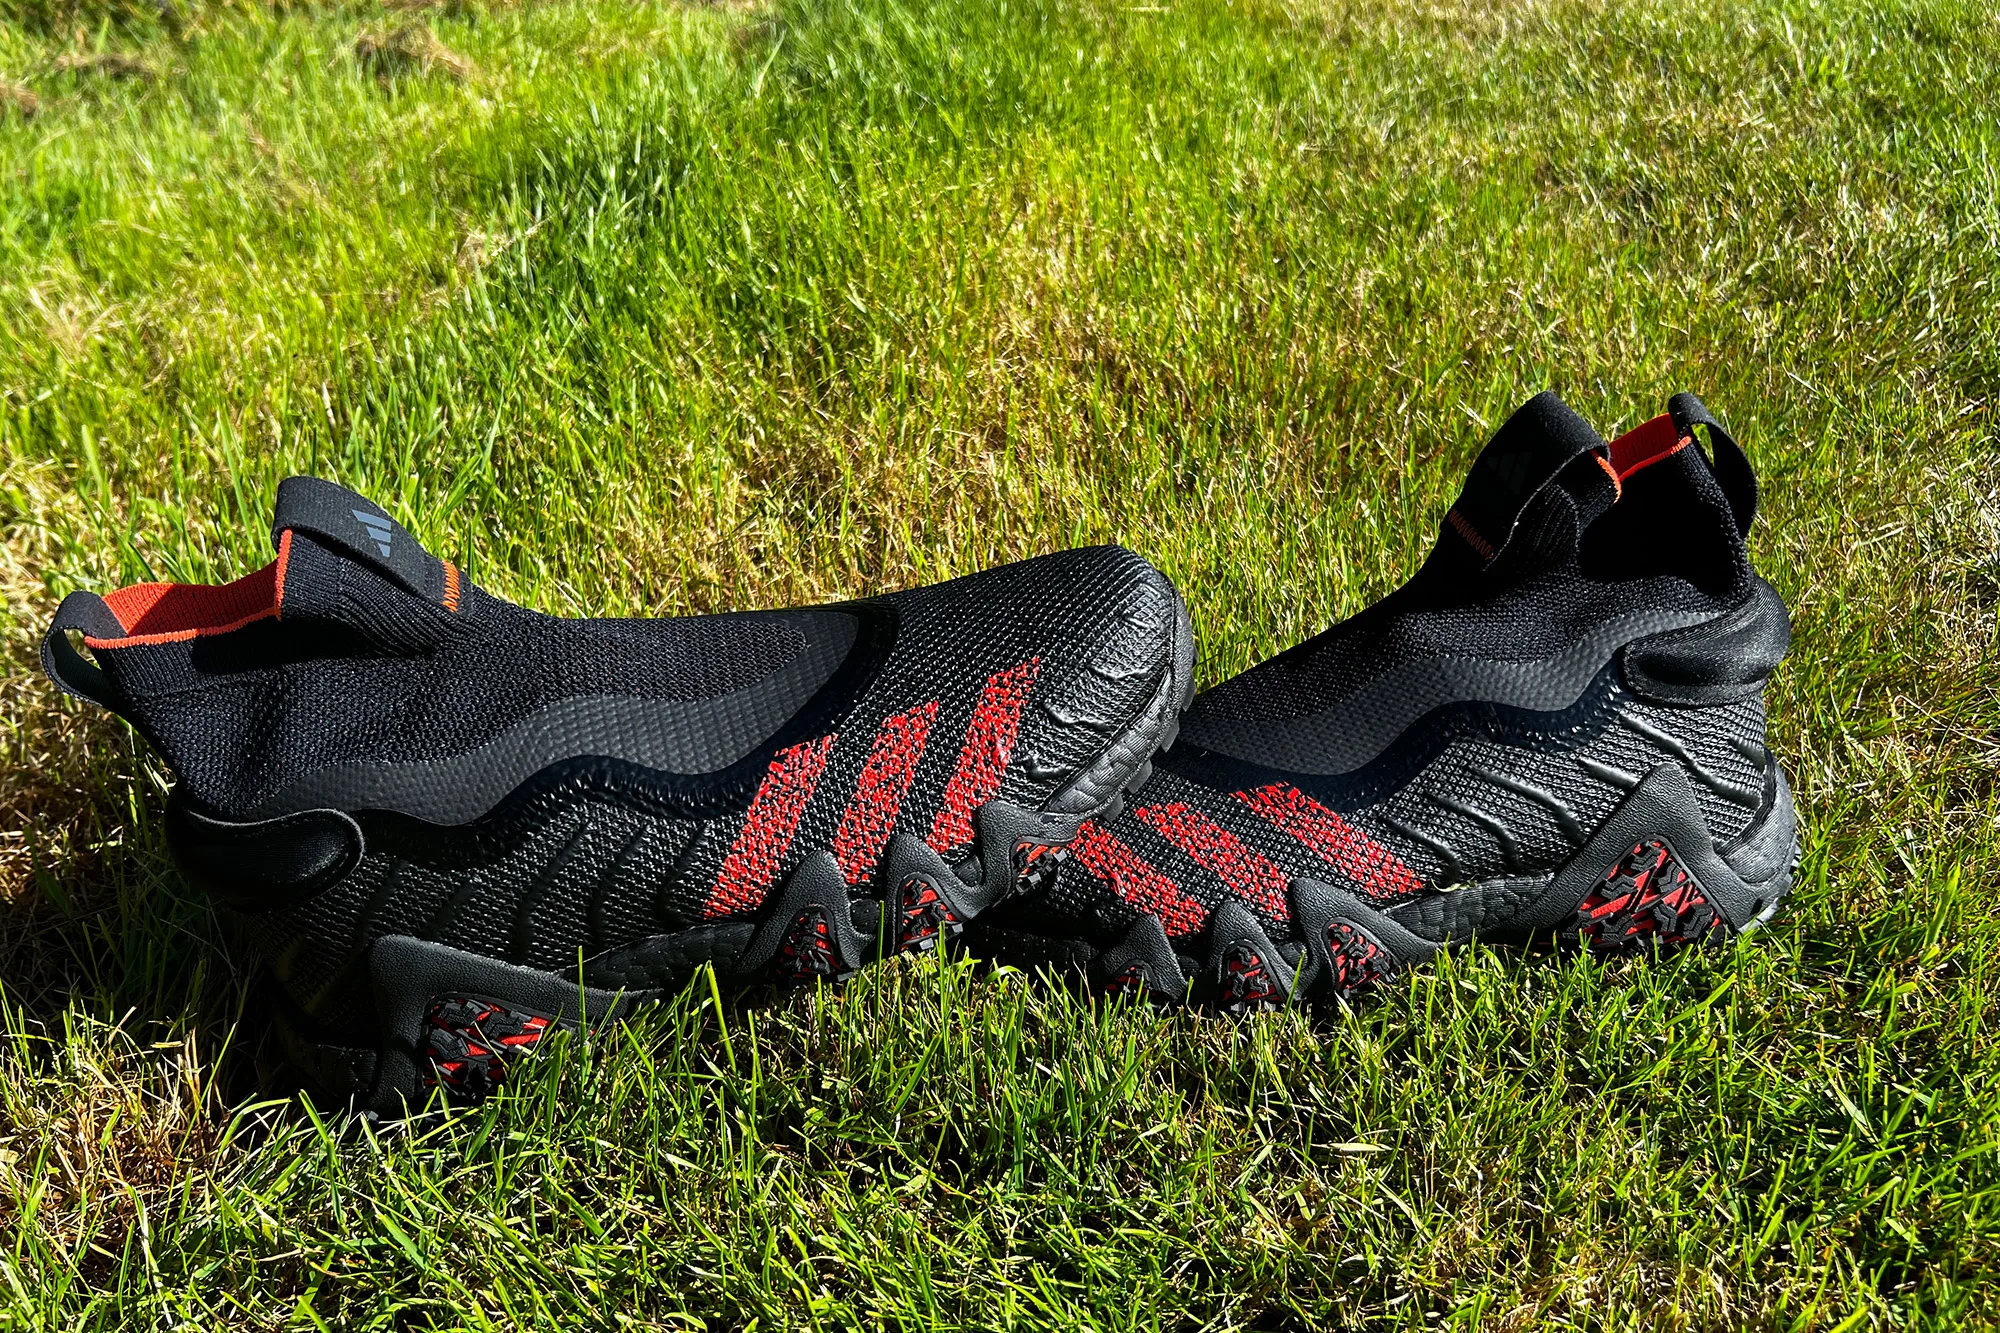 G/FORE MG4x2 Review: The Ultimate Go-Anywhere Shoe